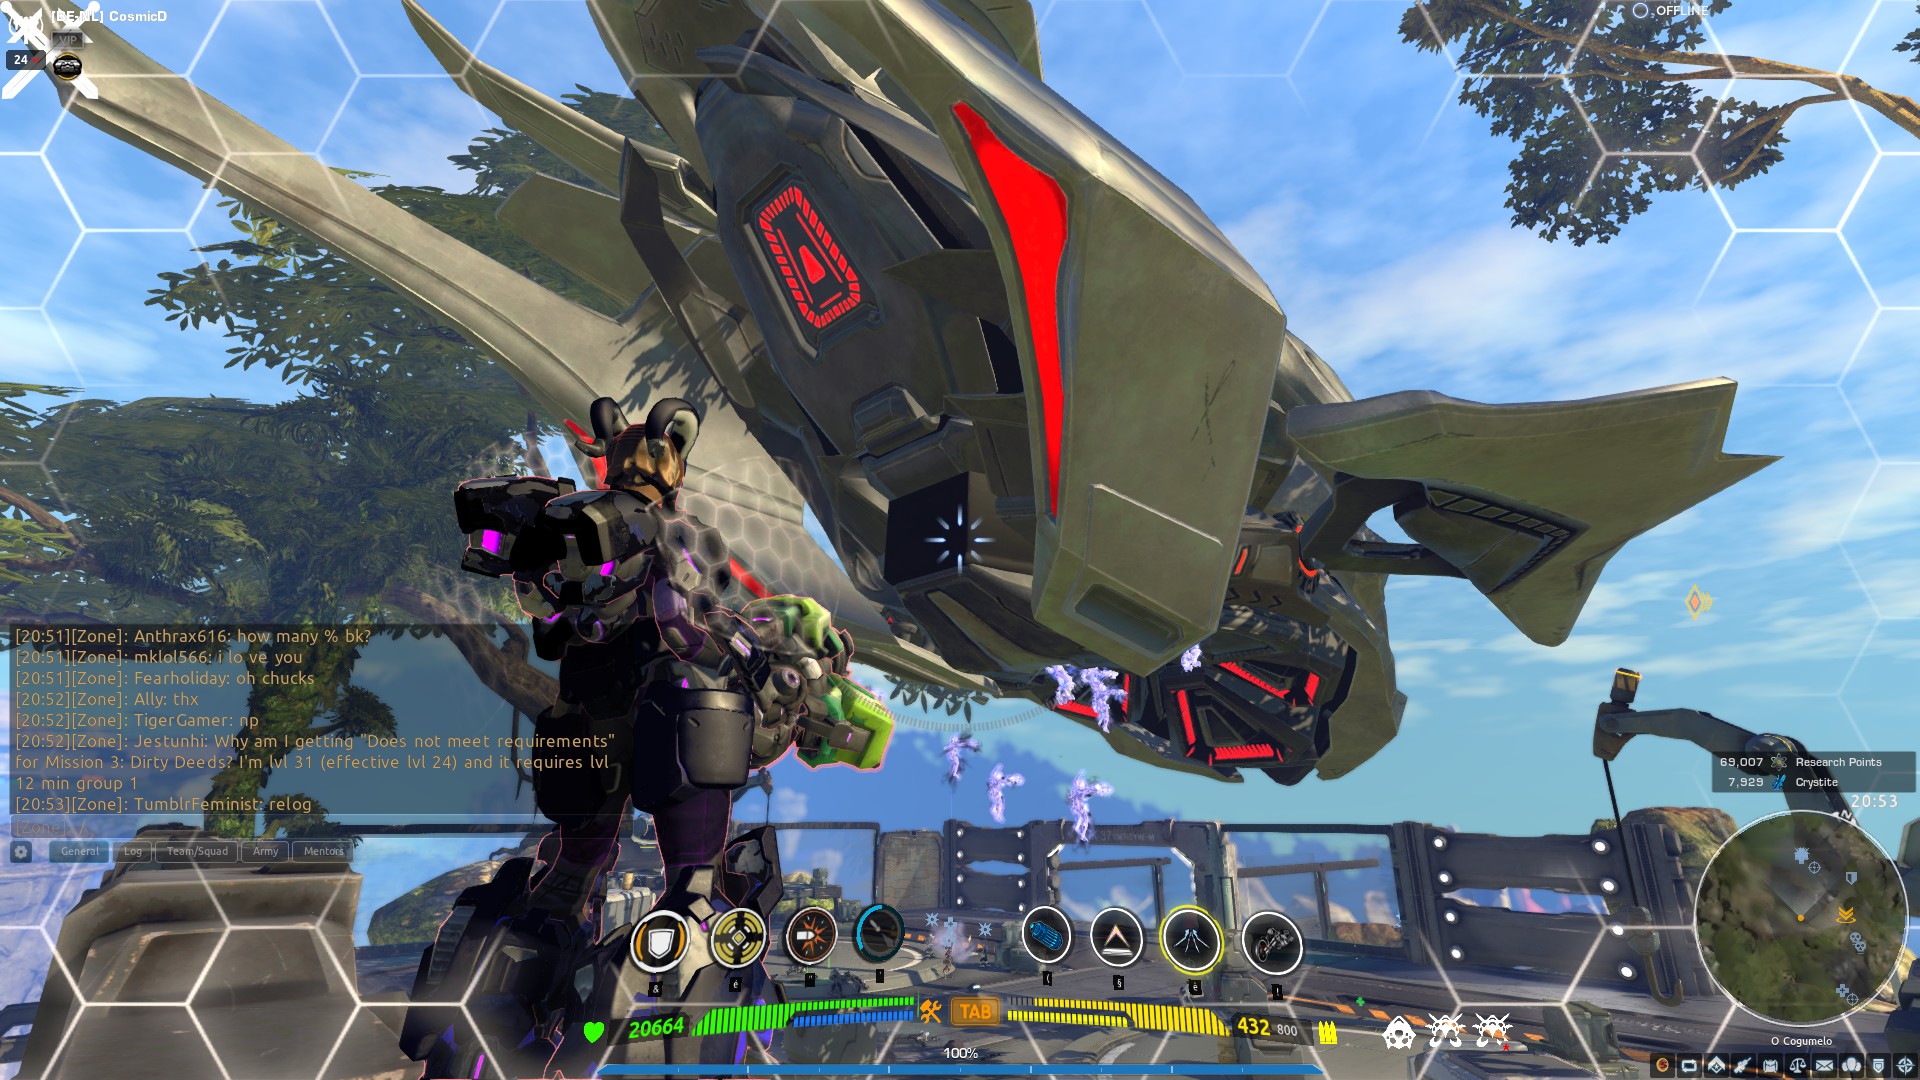 In Firefall, everything is high contrast! Easy to see enemies, easy to anticipate gunfire etc...